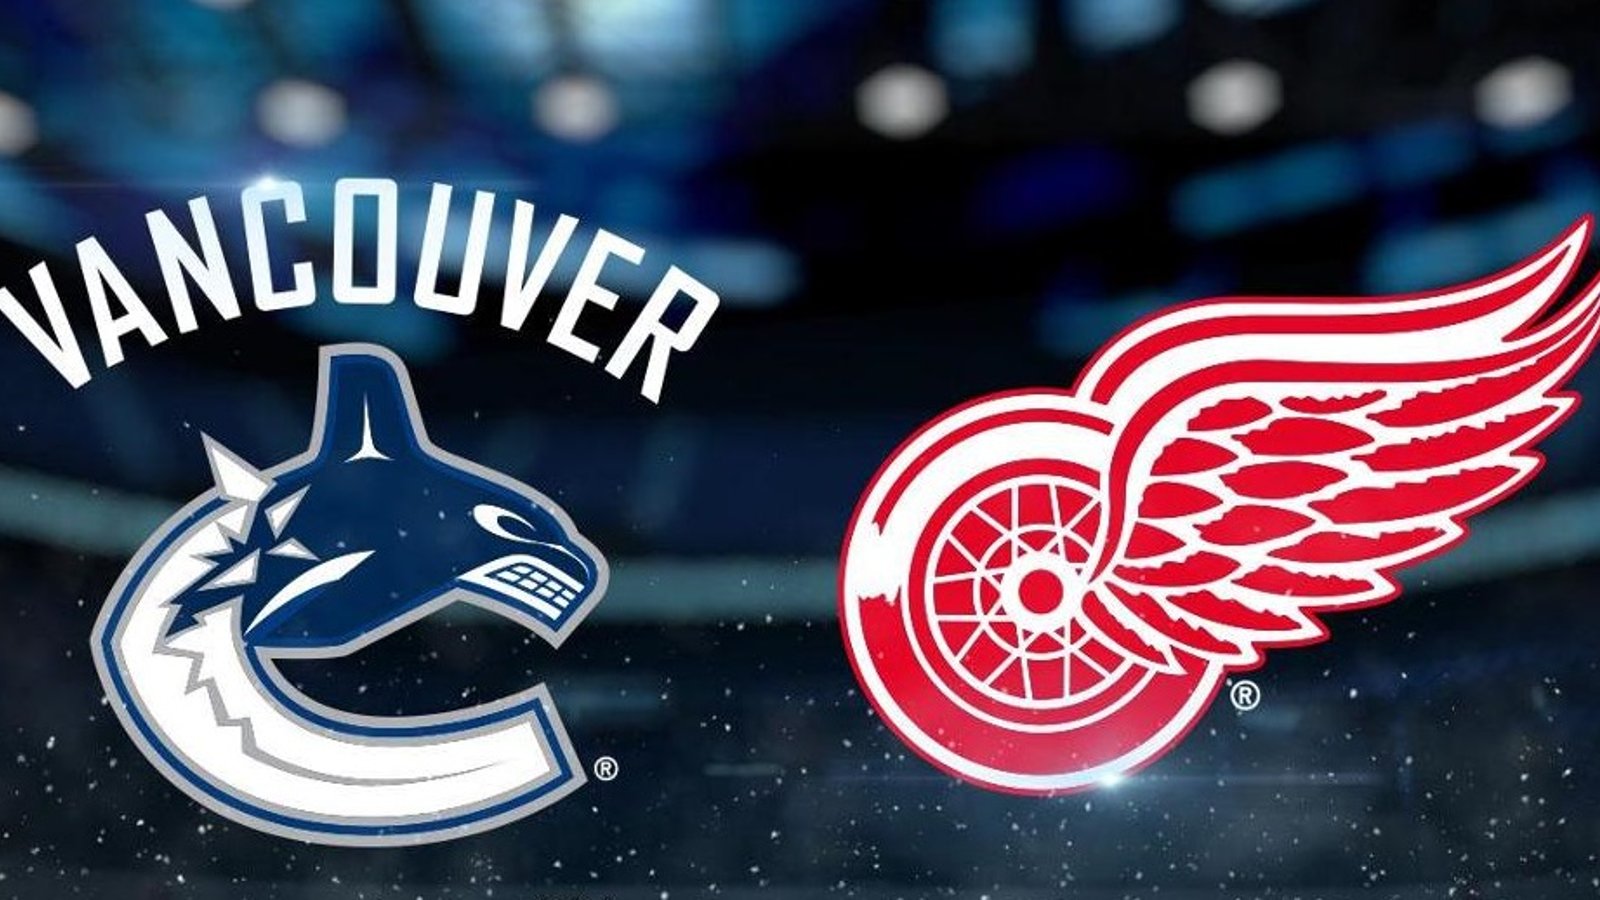 Full lineups for early game between Canucks and Red Wings.